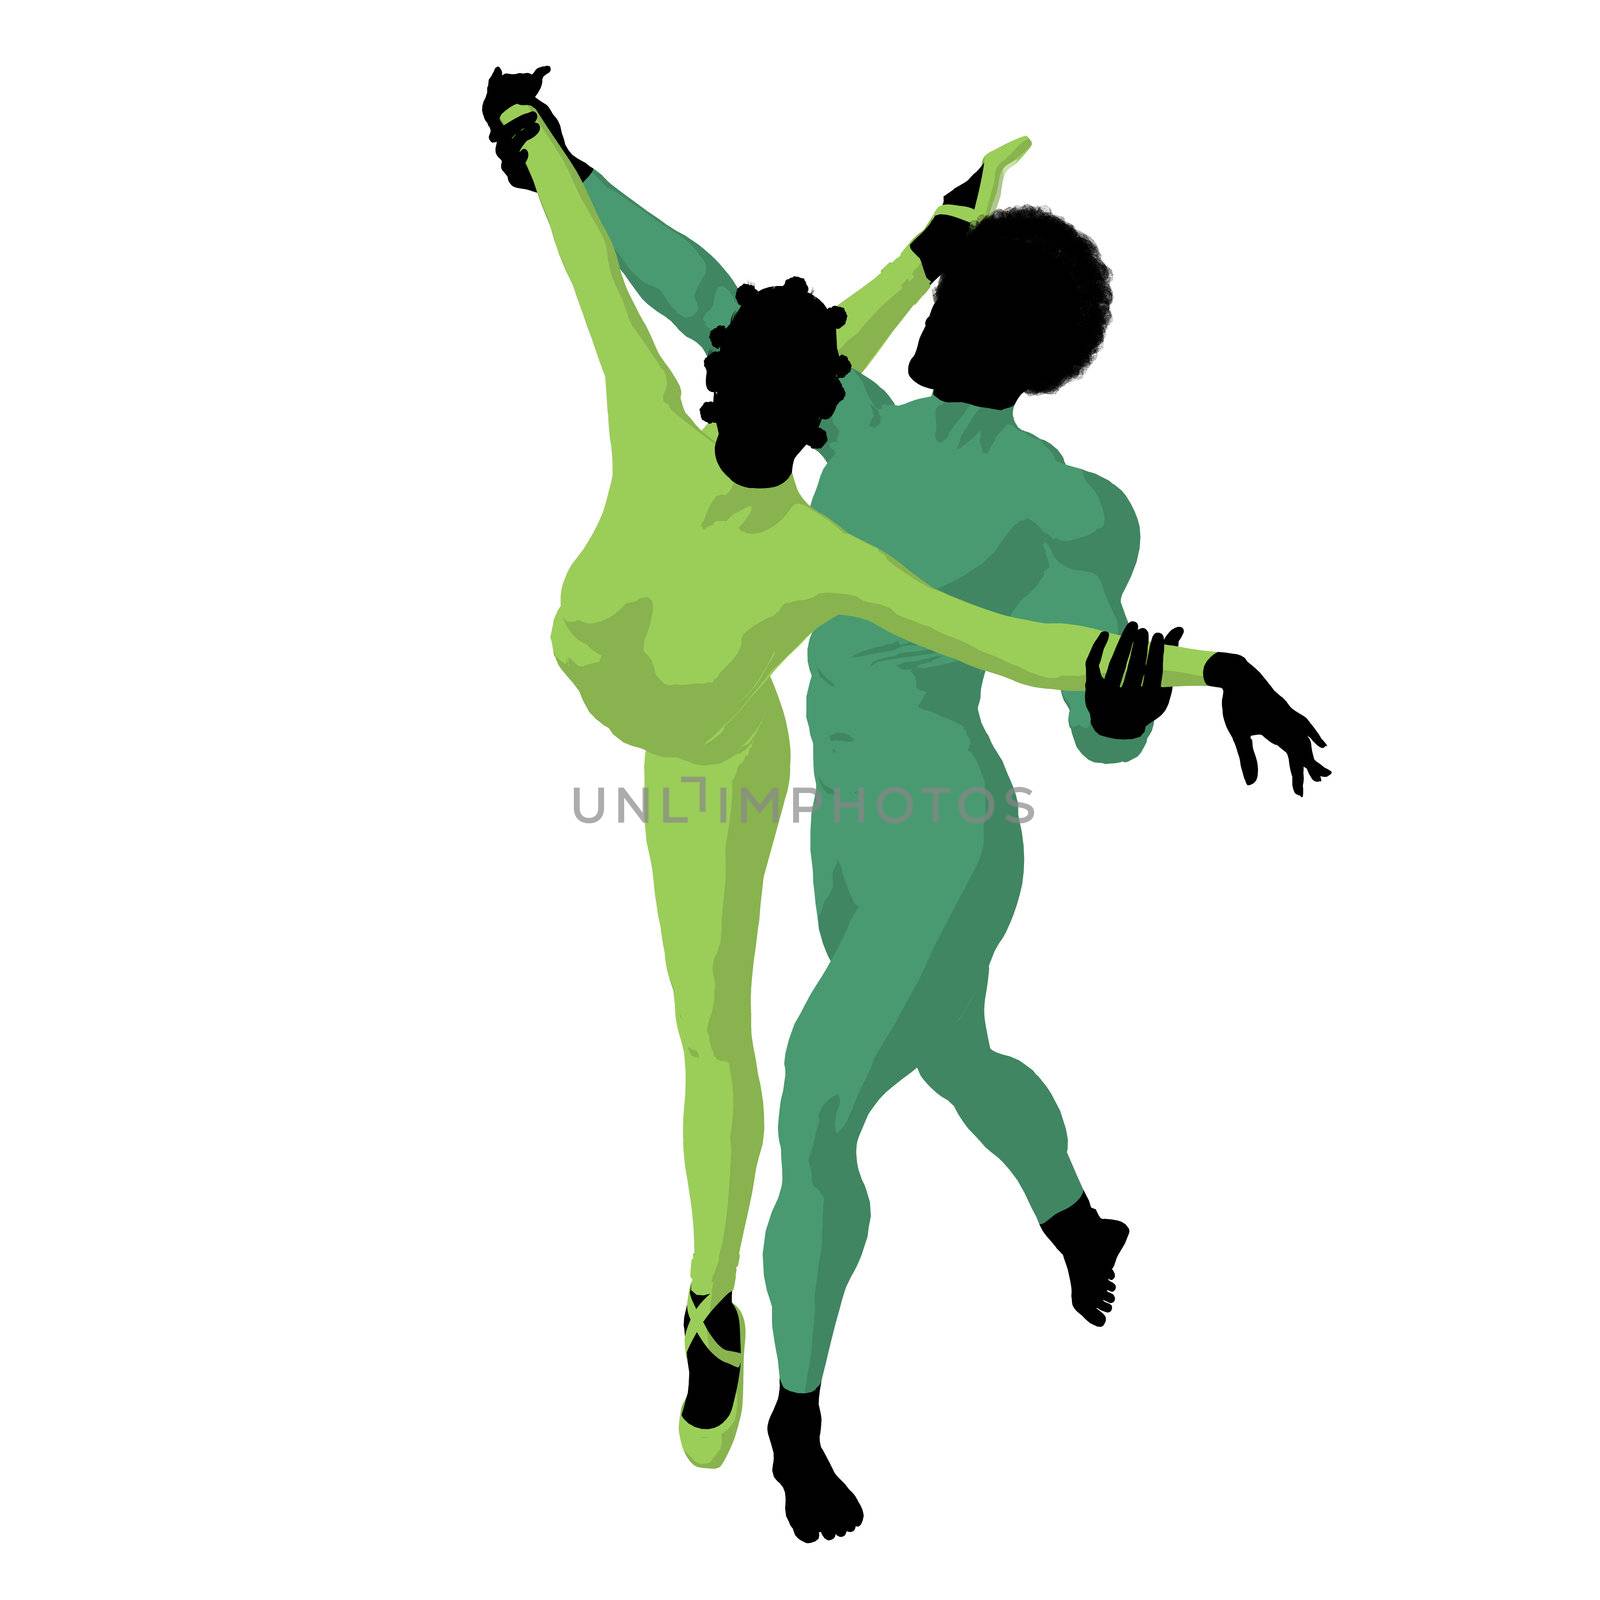 African American Ballet Couple Illustration Silhouette by kathygold